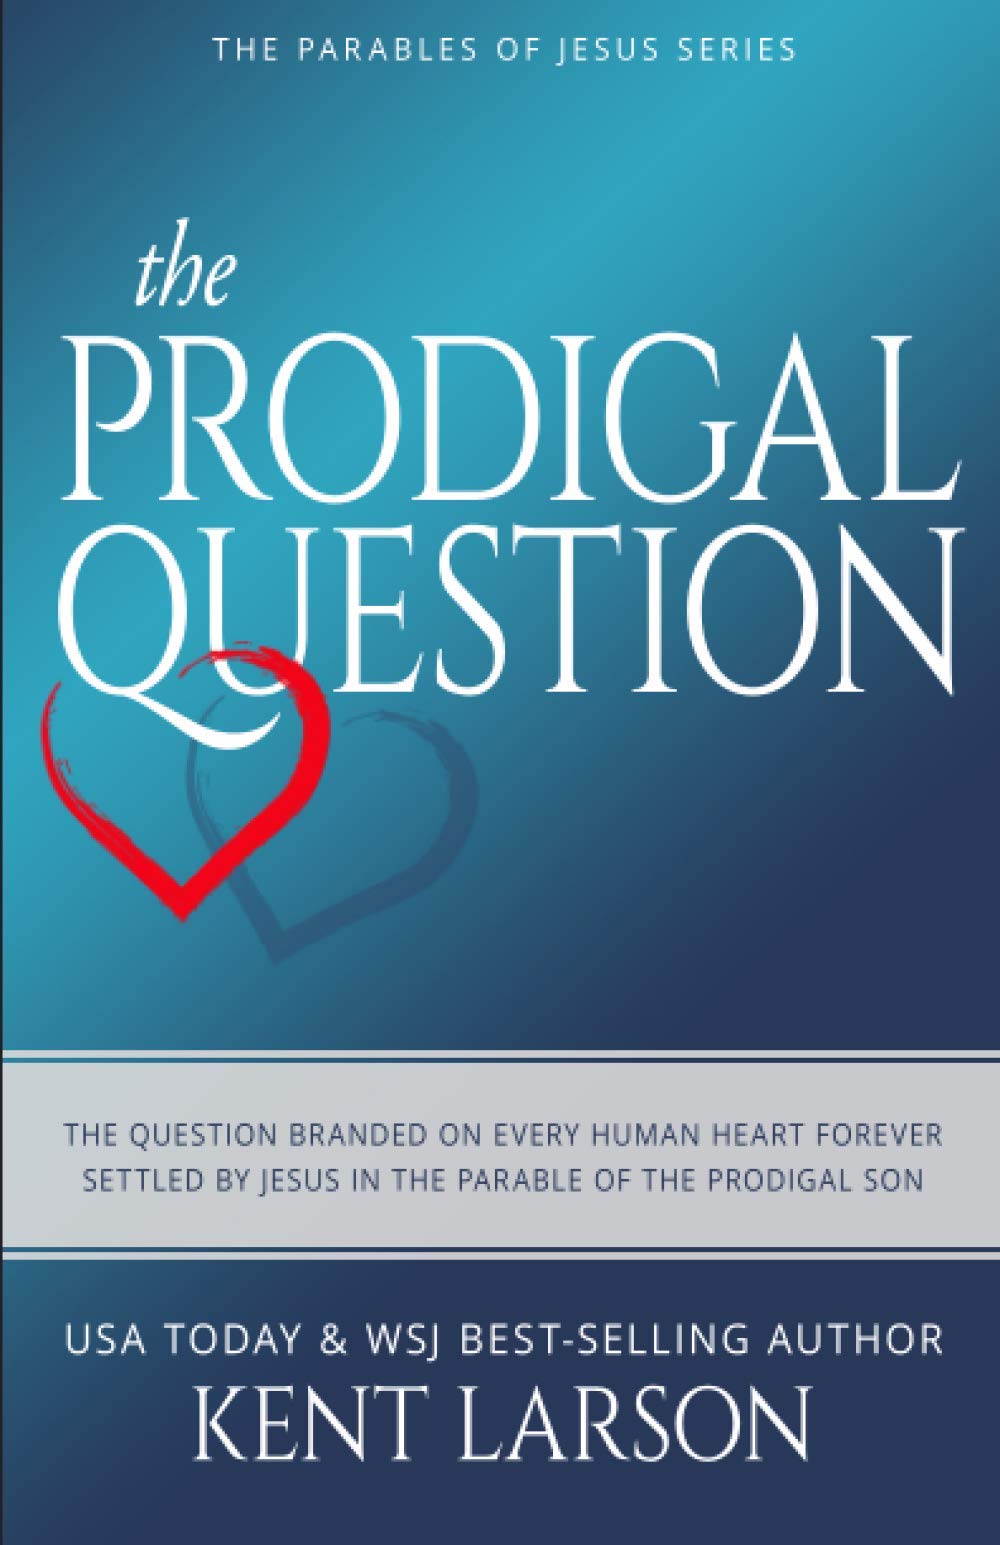 The Prodigal Question: The Question Branded on Every Human Heart Forever Settled by Jesus in the Parable of the Prodigal Son (Parables of Jesus)